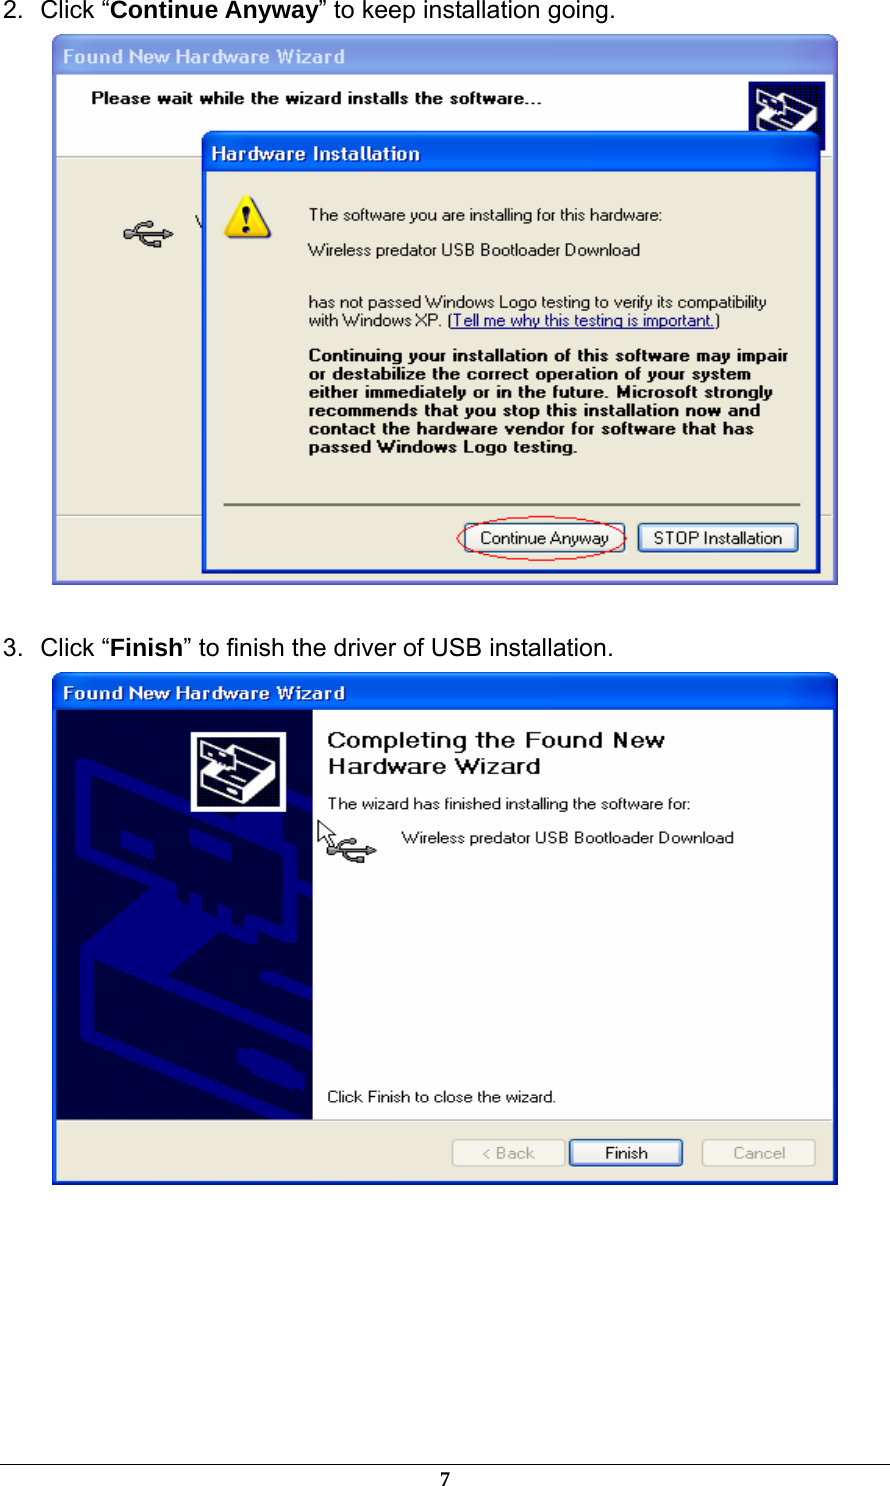  2. Click “Continue Anyway” to keep installation going.   3. Click “Finish” to finish the driver of USB installation.        7 